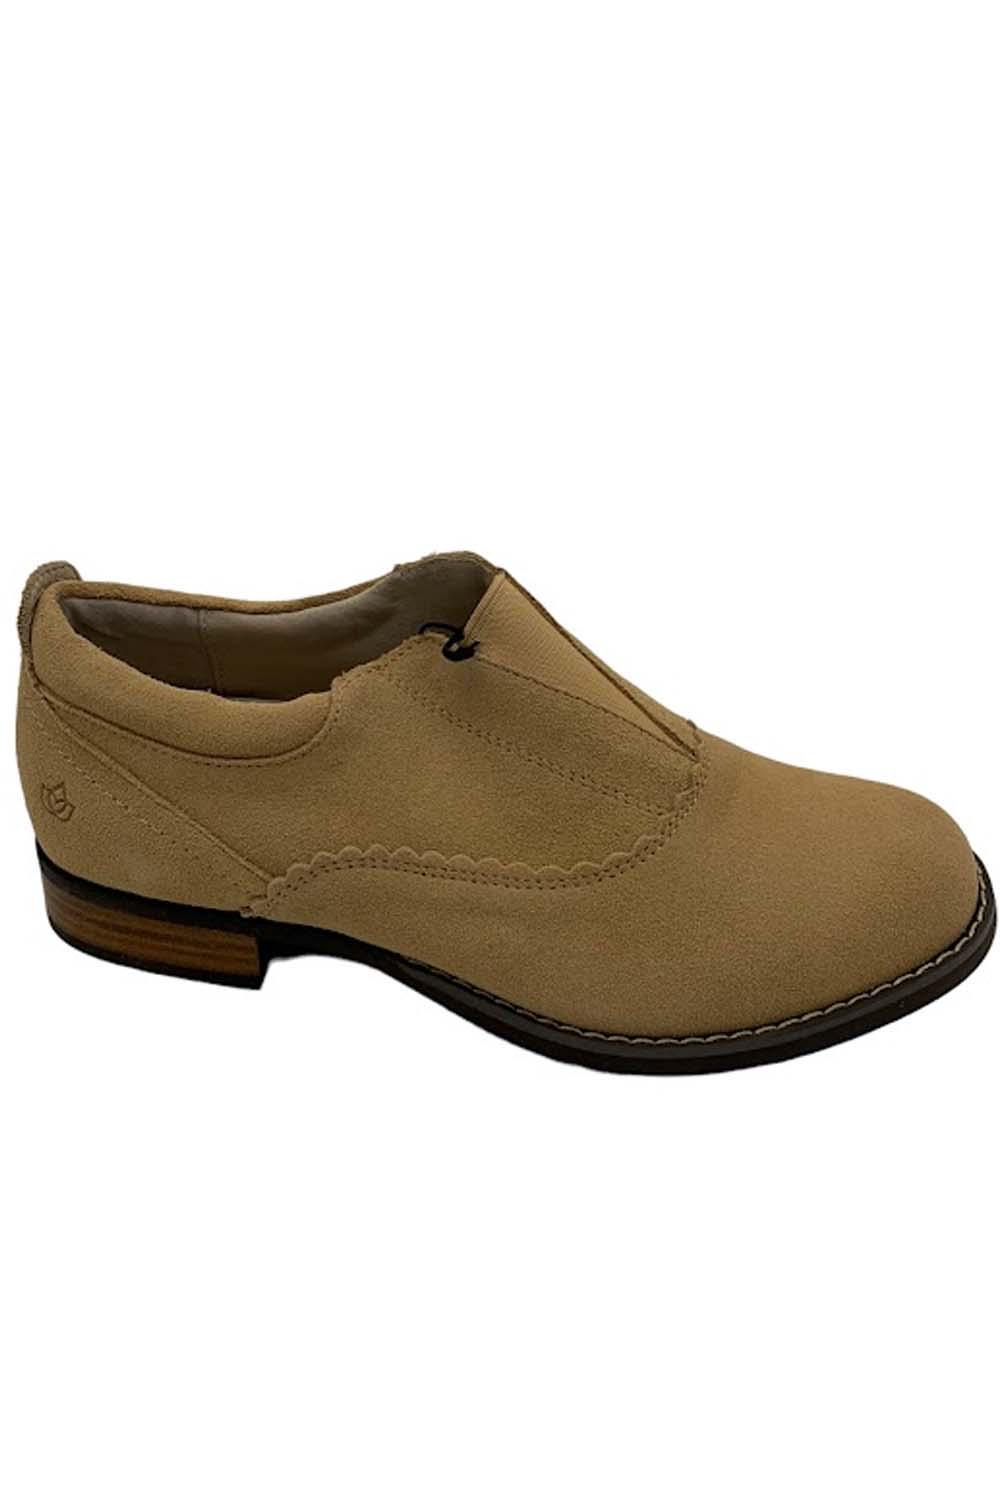 Spenco Orthotic Leather Loafers Paradise Wheat | Jender